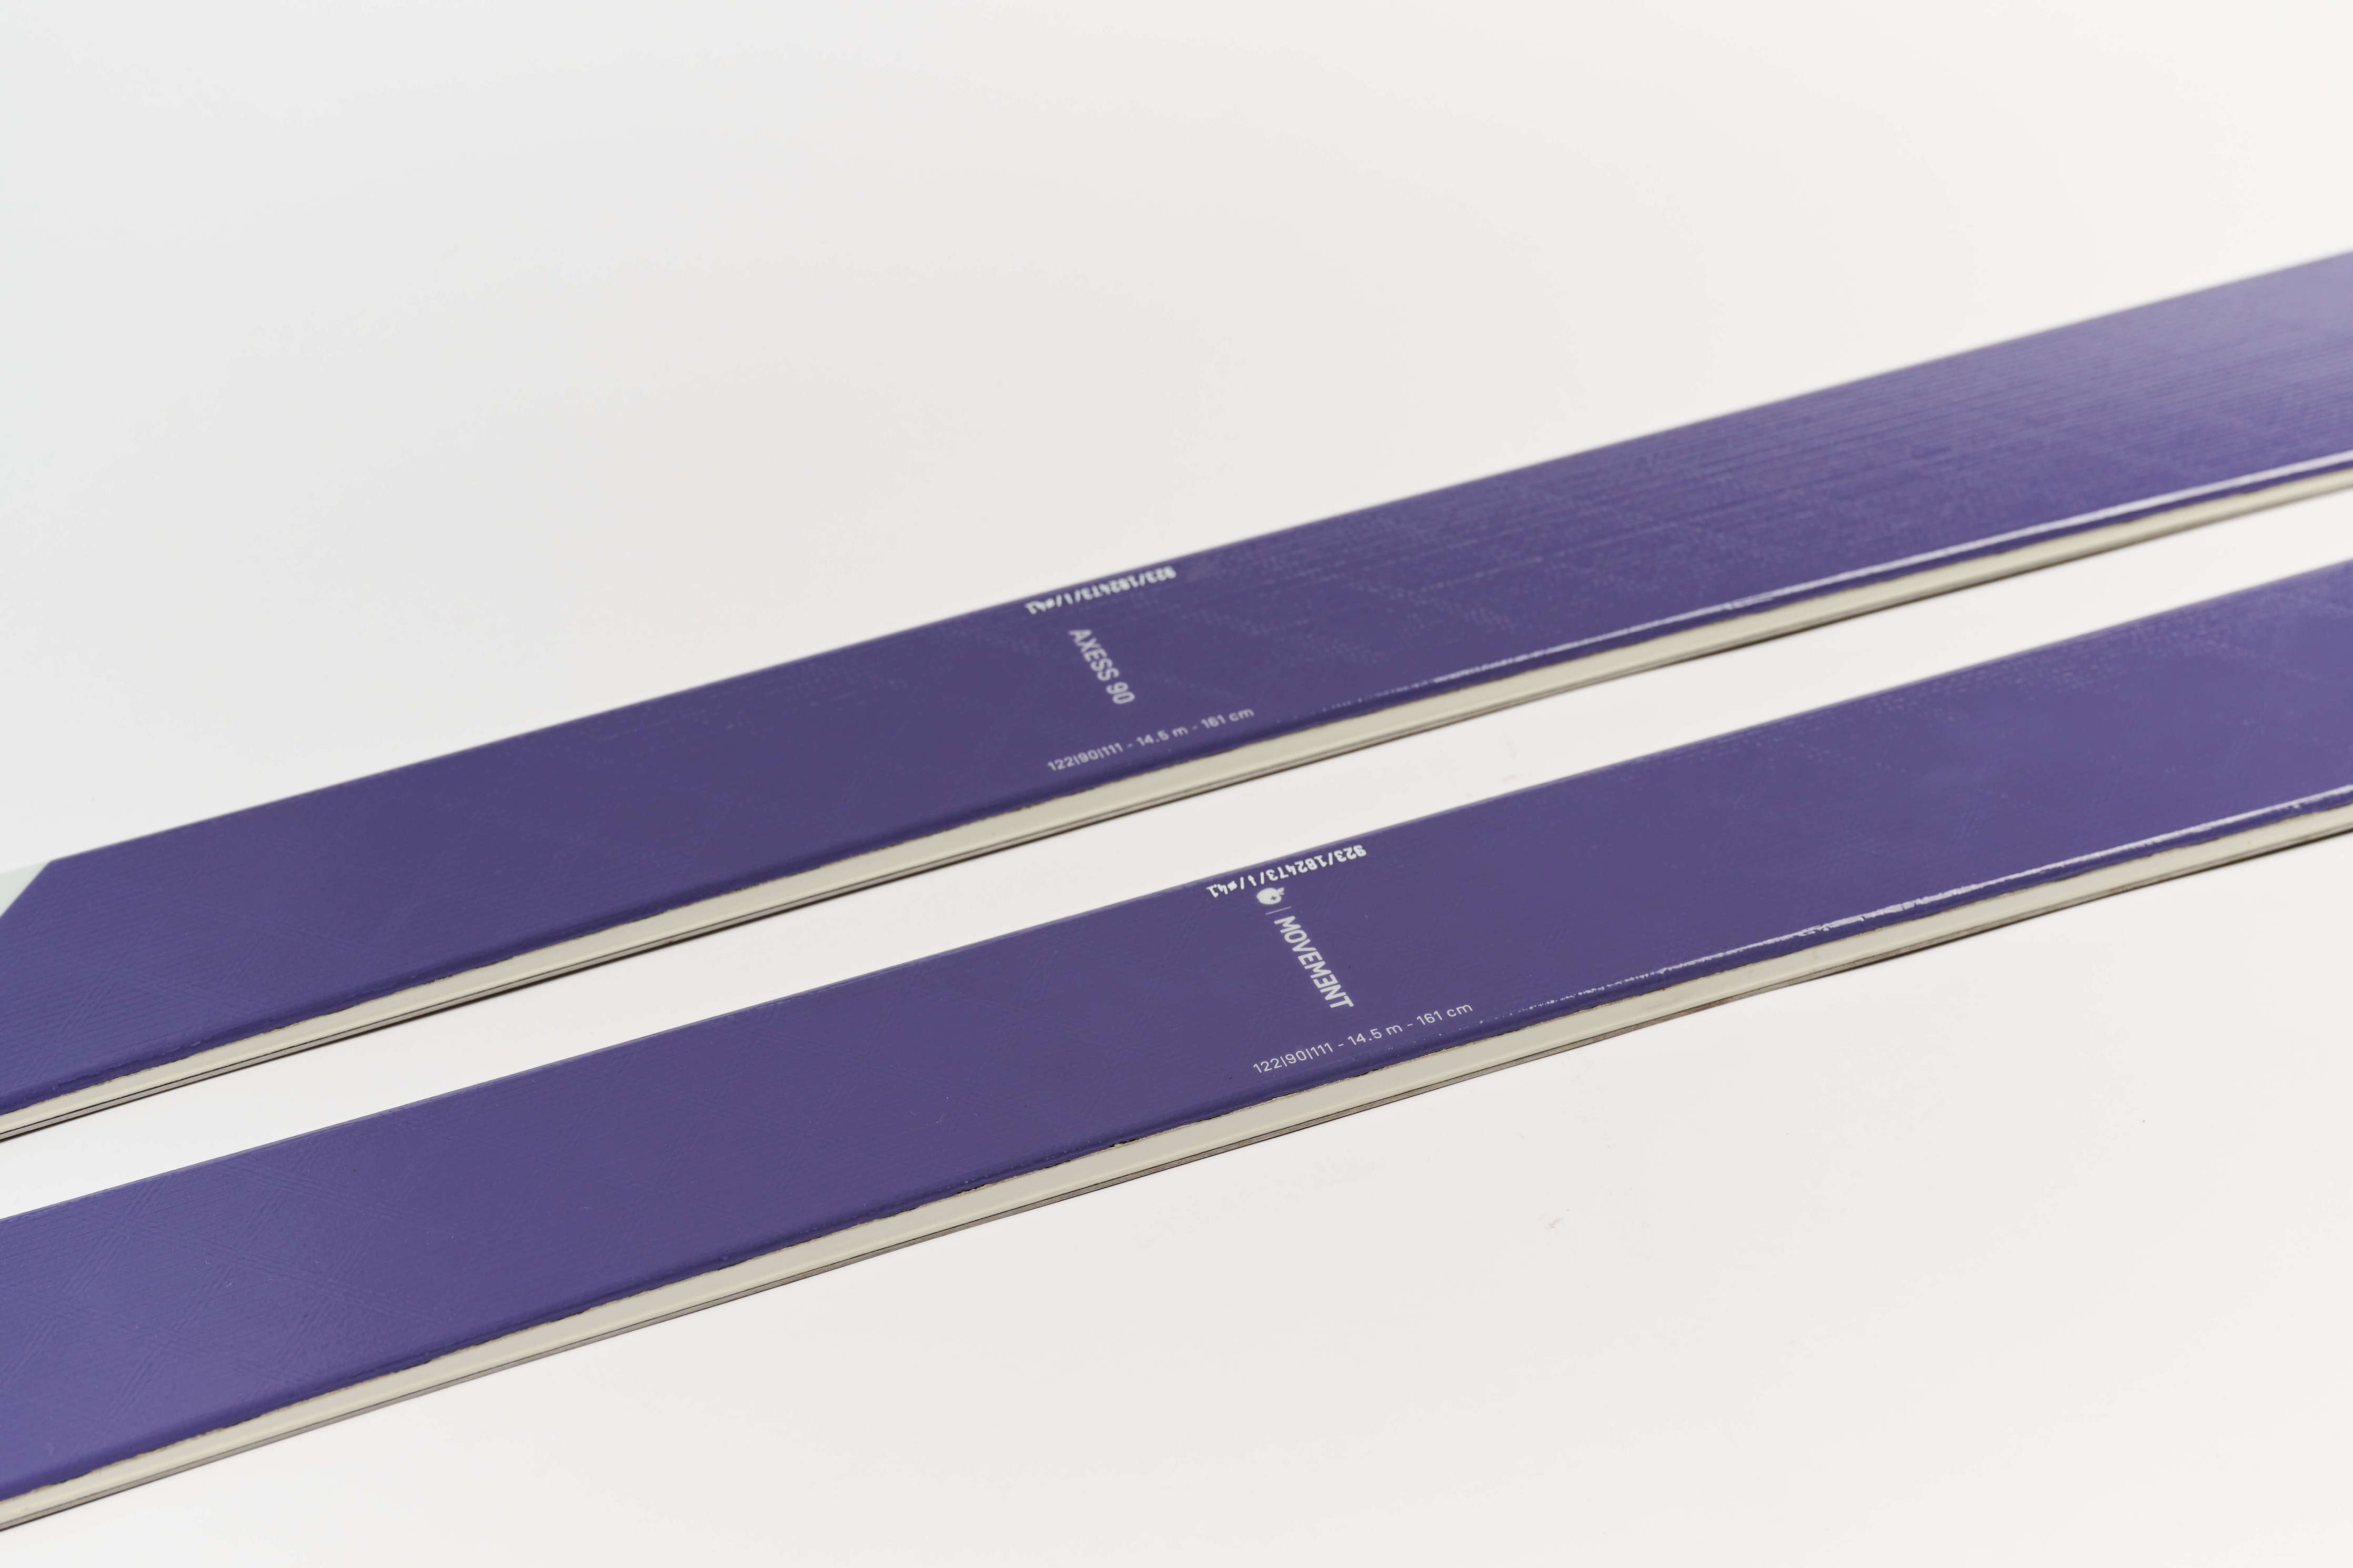 Elevate your skiing journey with Movement's Axess 90 Women's skis.